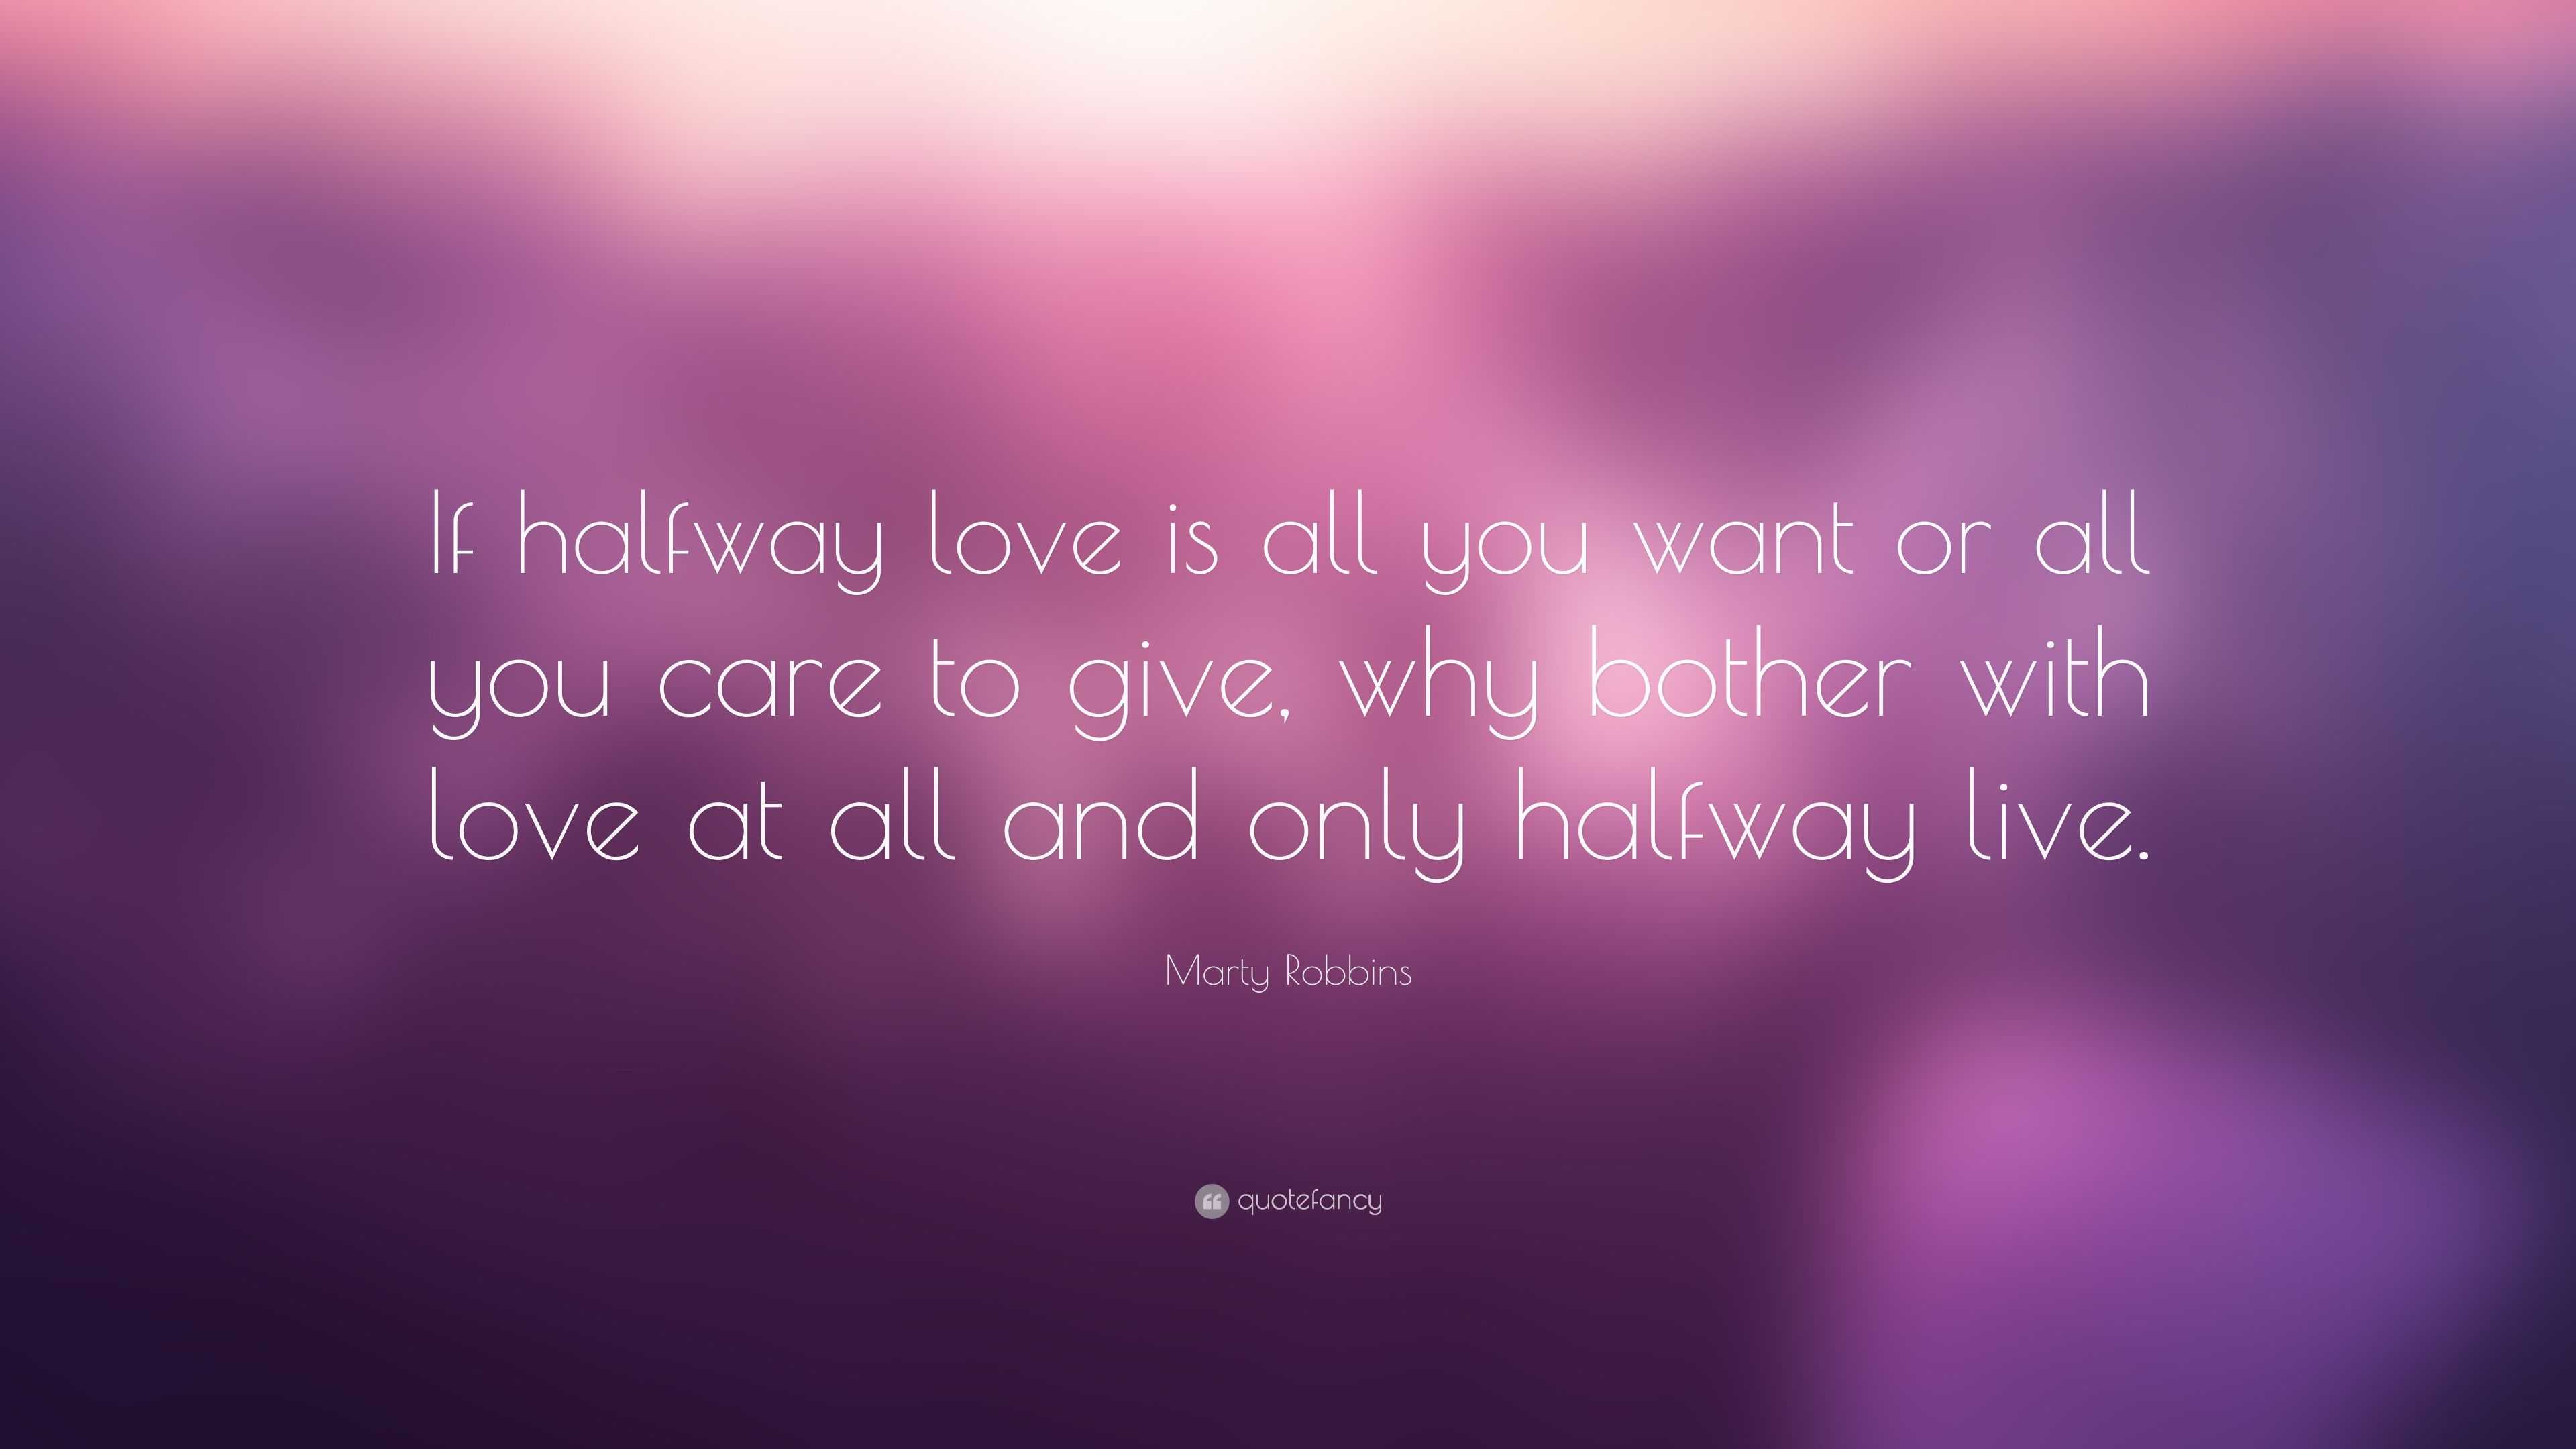 Marty Robbins Quote: “If halfway love is all you want or all you care ...